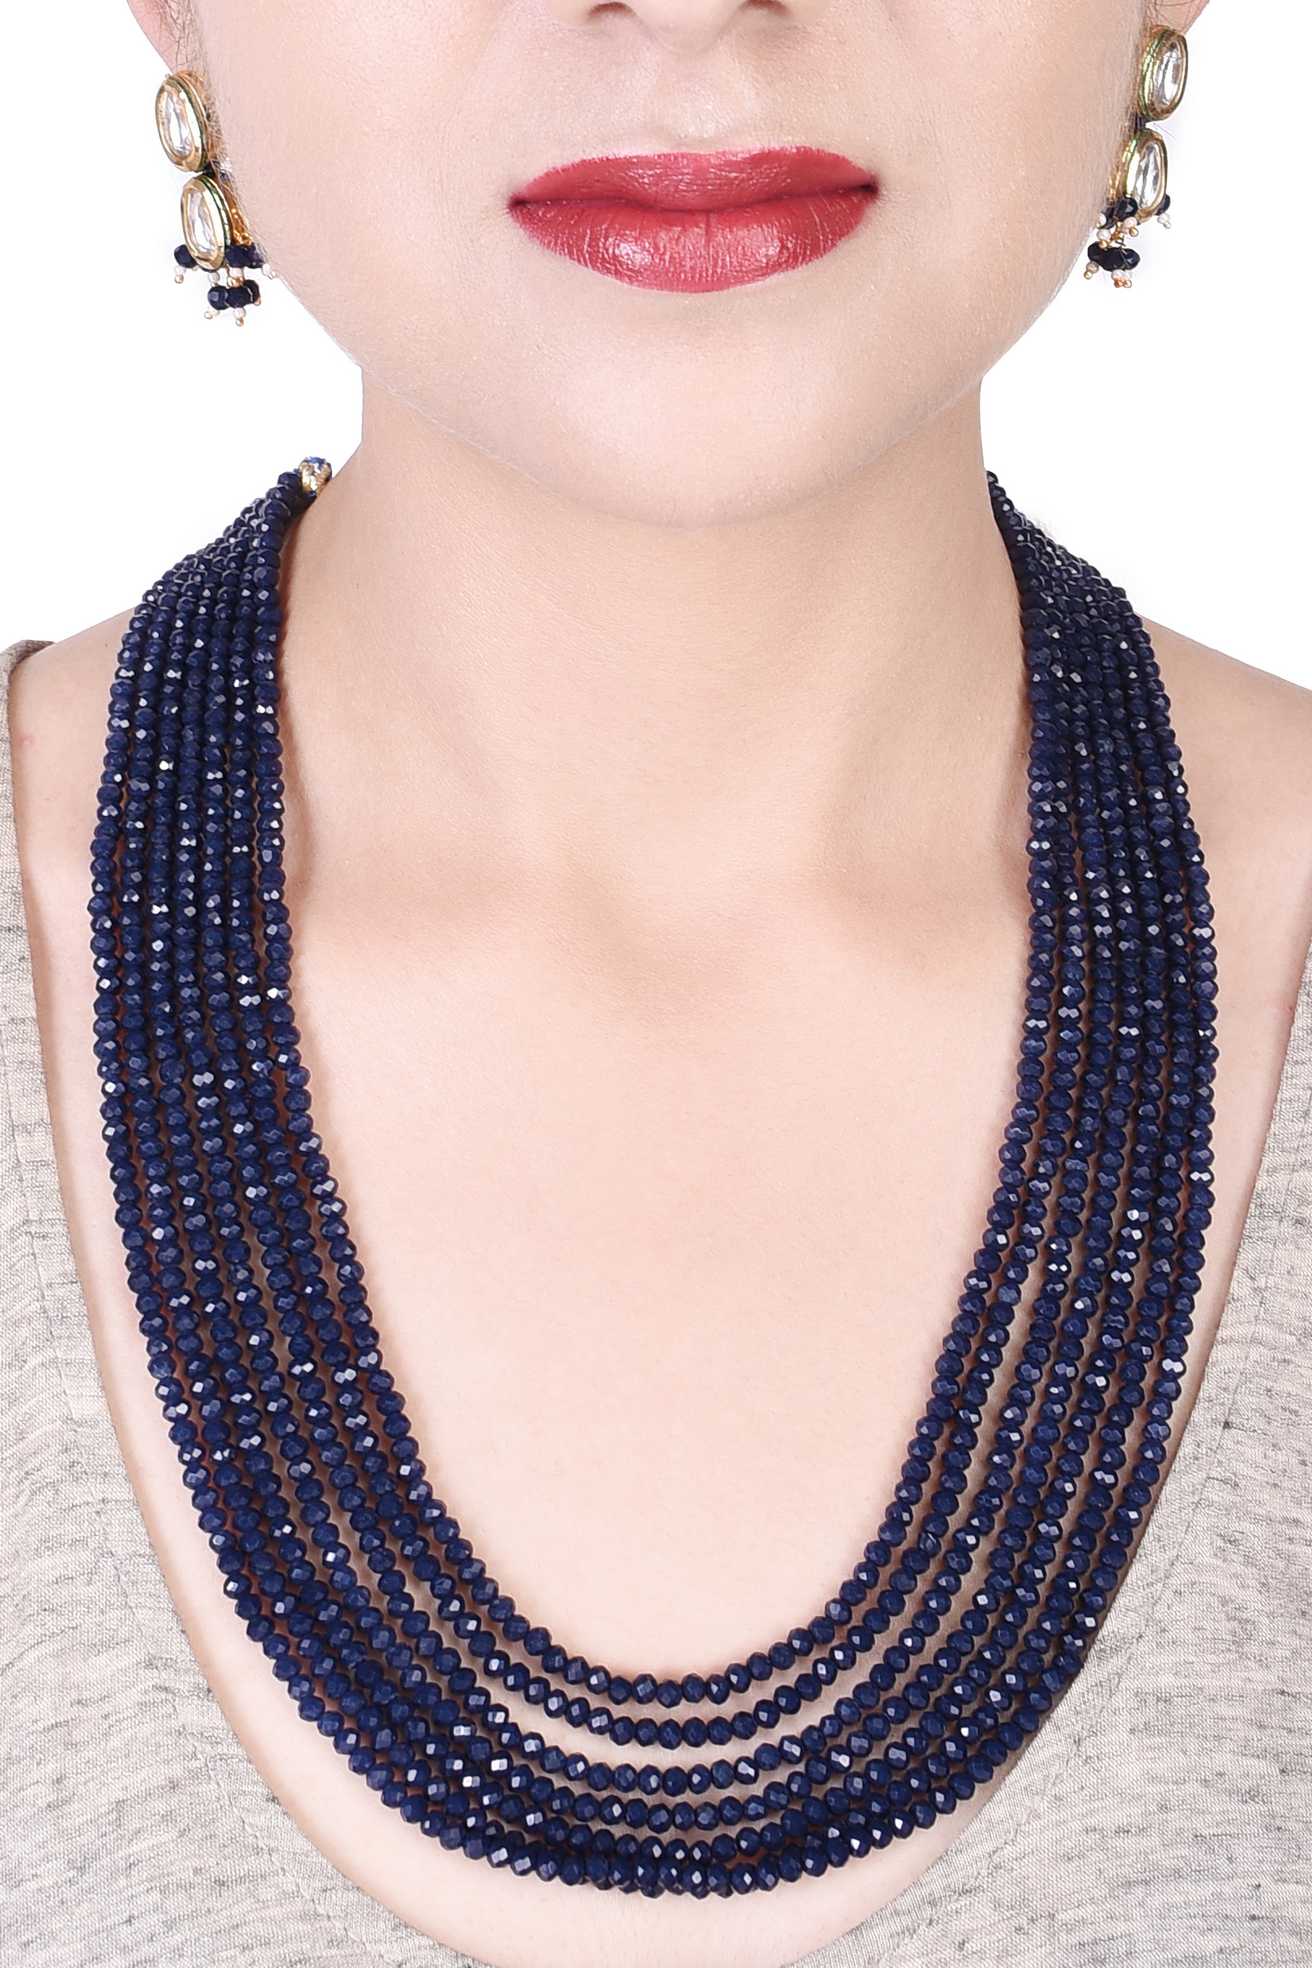 Buy Chinese Crystal Beads 72 8mm Opaque Navy Blue Rondelle Chinese Crystal  Glass Beads Hand Woven Necklace Holiday Special Online in India - Etsy